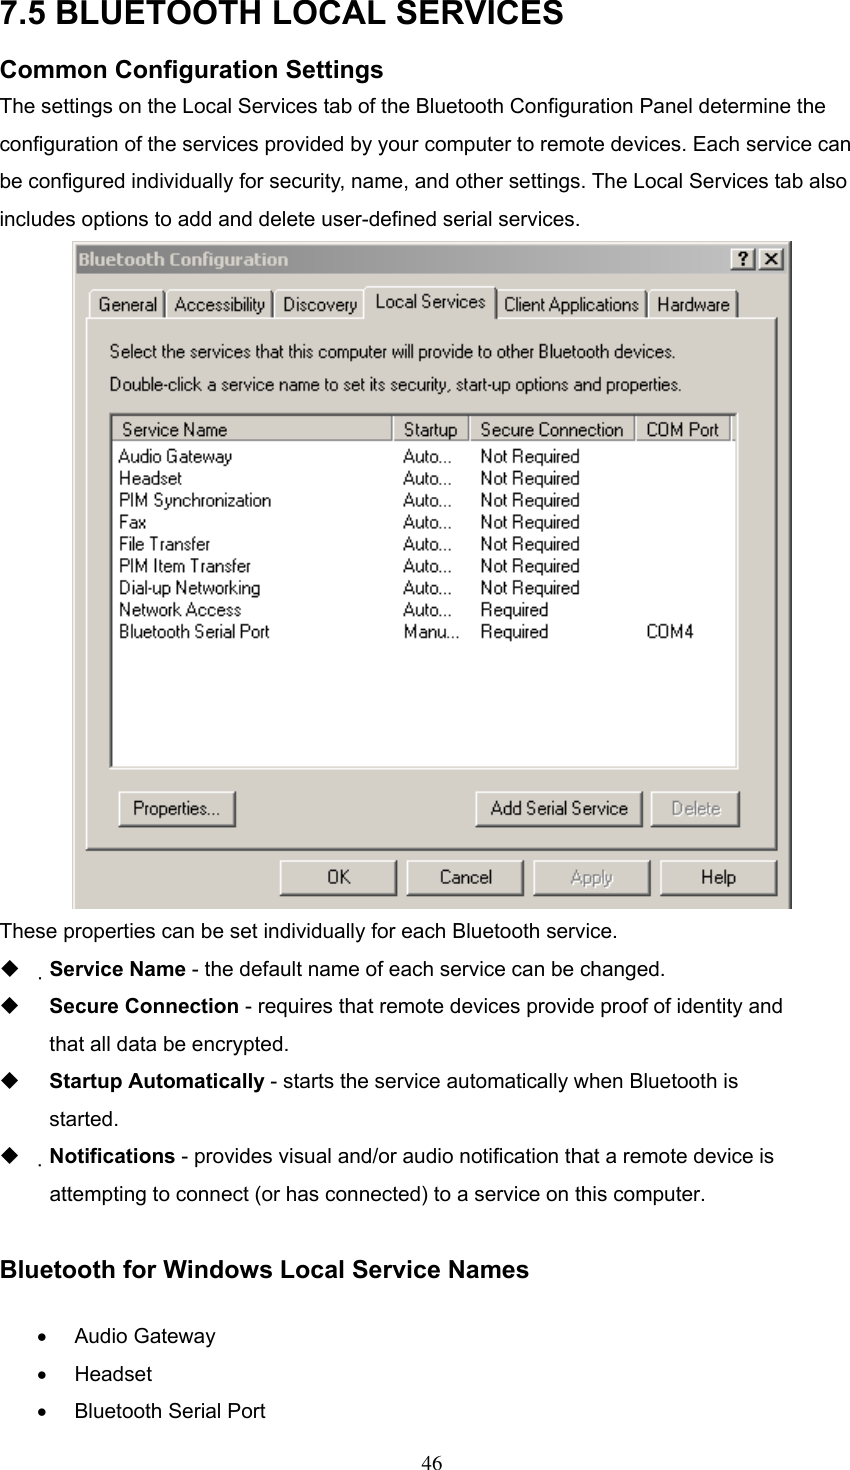 7.5 BLUETOOTH LOCAL SERVICES Common Configuration Settings The settings on the Local Services tab of the Bluetooth Configuration Panel determine the configuration of the services provided by your computer to remote devices. Each service can be configured individually for security, name, and other settings. The Local Services tab also includes options to add and delete user-defined serial services.  These properties can be set individually for each Bluetooth service.   Service Name - the default name of each service can be changed.   Secure Connection - requires that remote devices provide proof of identity and that all data be encrypted.   Startup Automatically - starts the service automatically when Bluetooth is started.   Notifications - provides visual and/or audio notification that a remote device is attempting to connect (or has connected) to a service on this computer.  Bluetooth for Windows Local Service Names •  Audio Gateway •  Headset  •  Bluetooth Serial Port  46 